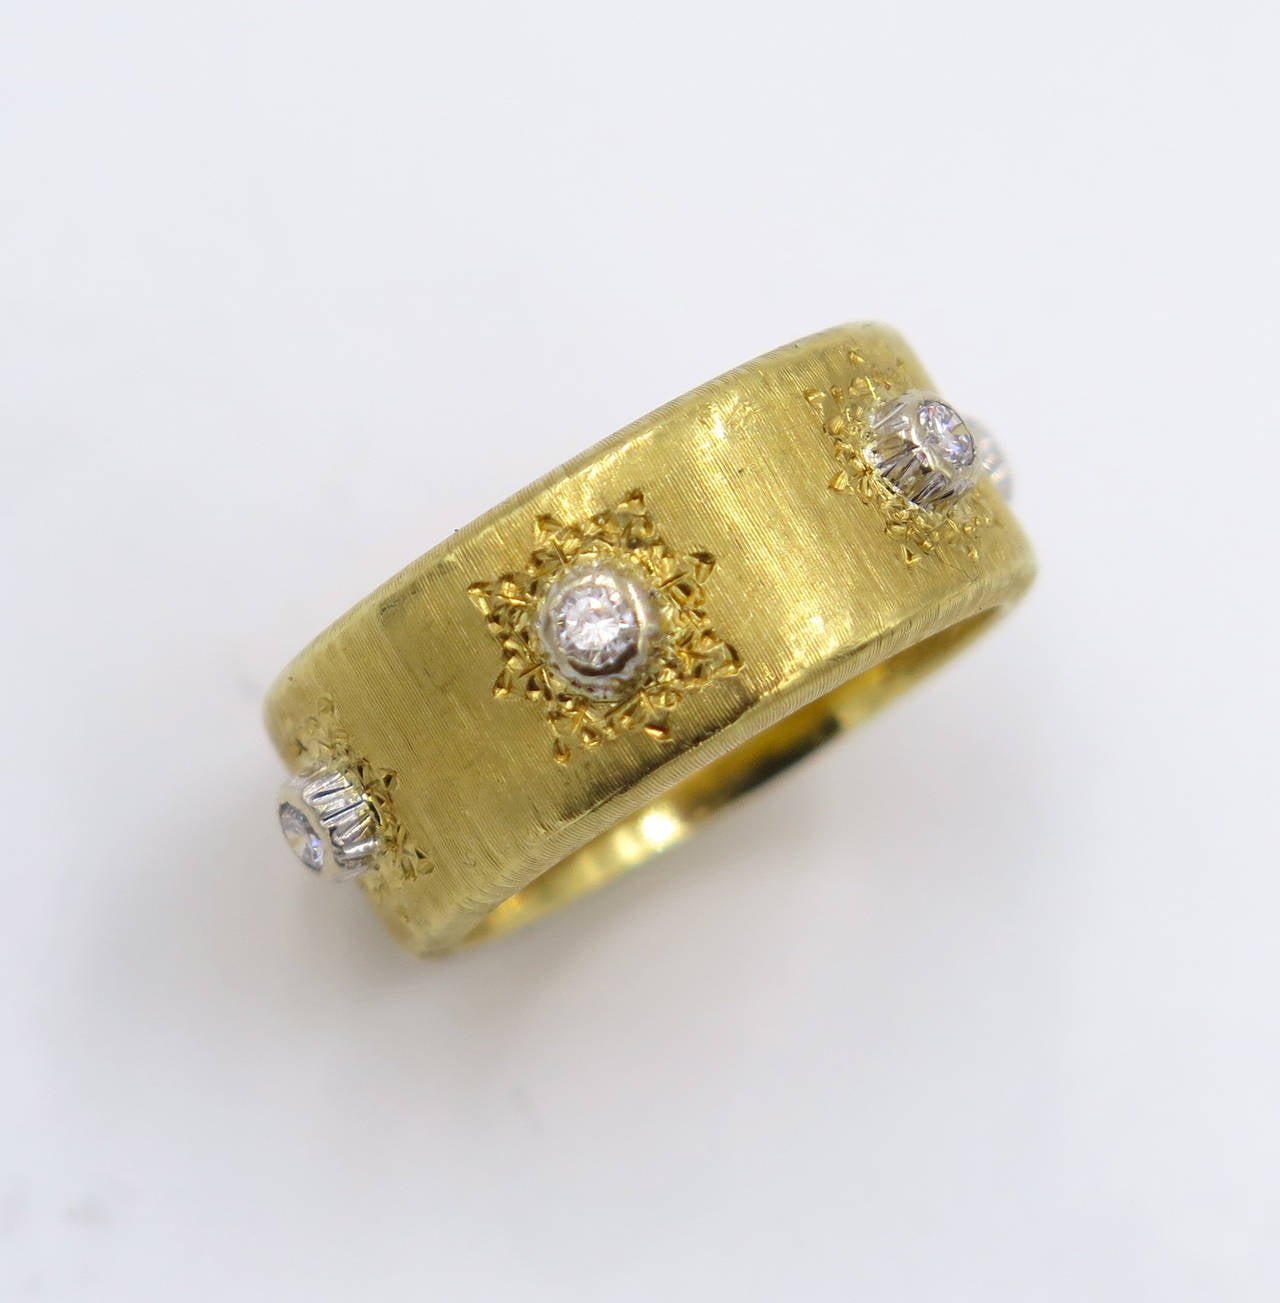 An 18 karat yellow gold and diamond “Classica” ring, Buccellati. The ring has a gross weight of 7.2 grams and is a size 6.  With original box.